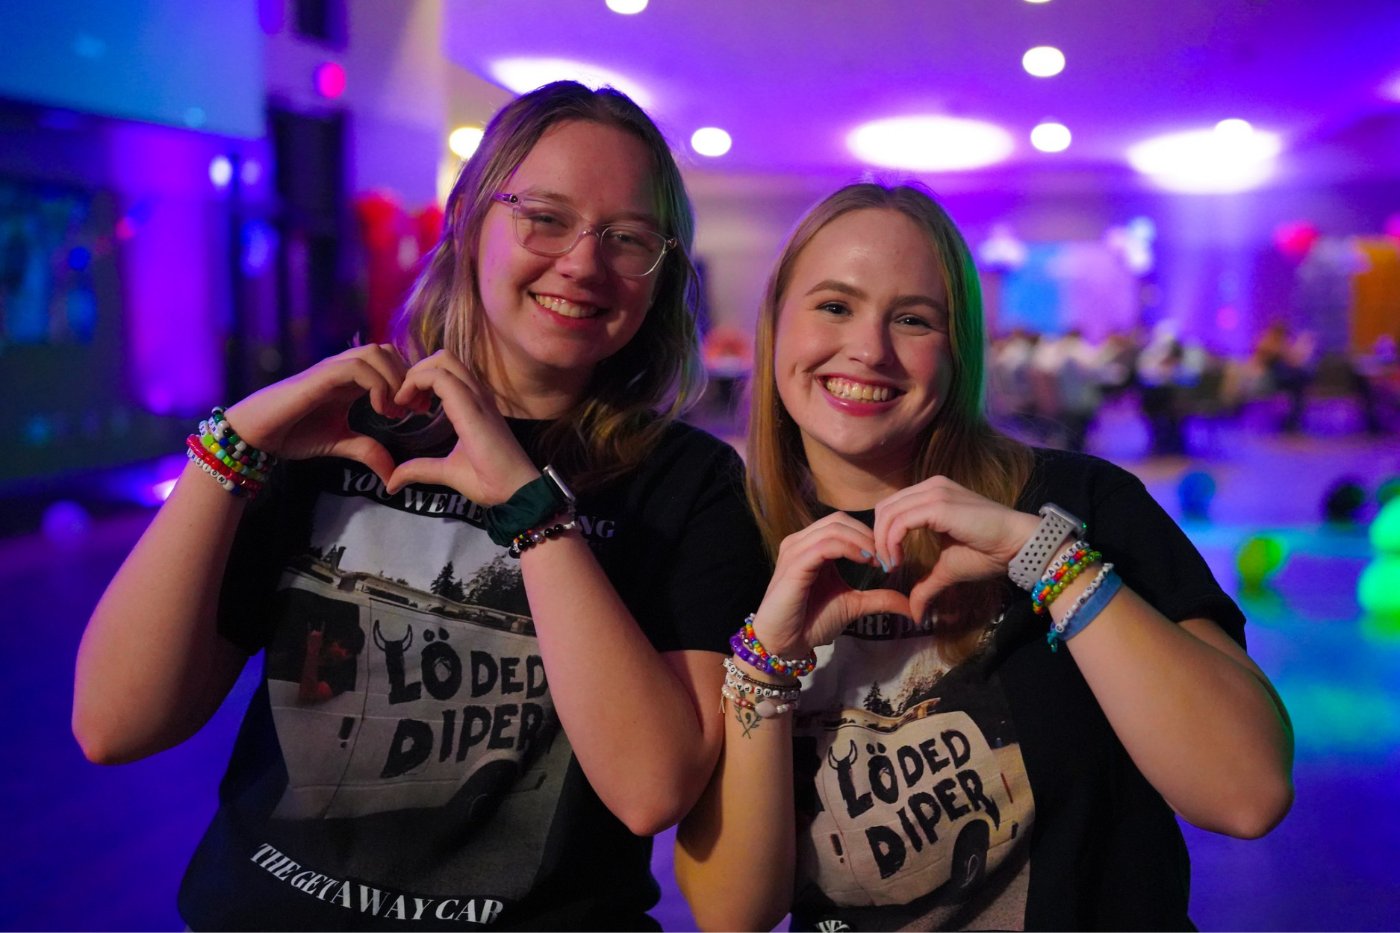 Two sorority members hold up heart hands and smile at the camera at a Taylor Swift-themed dance party